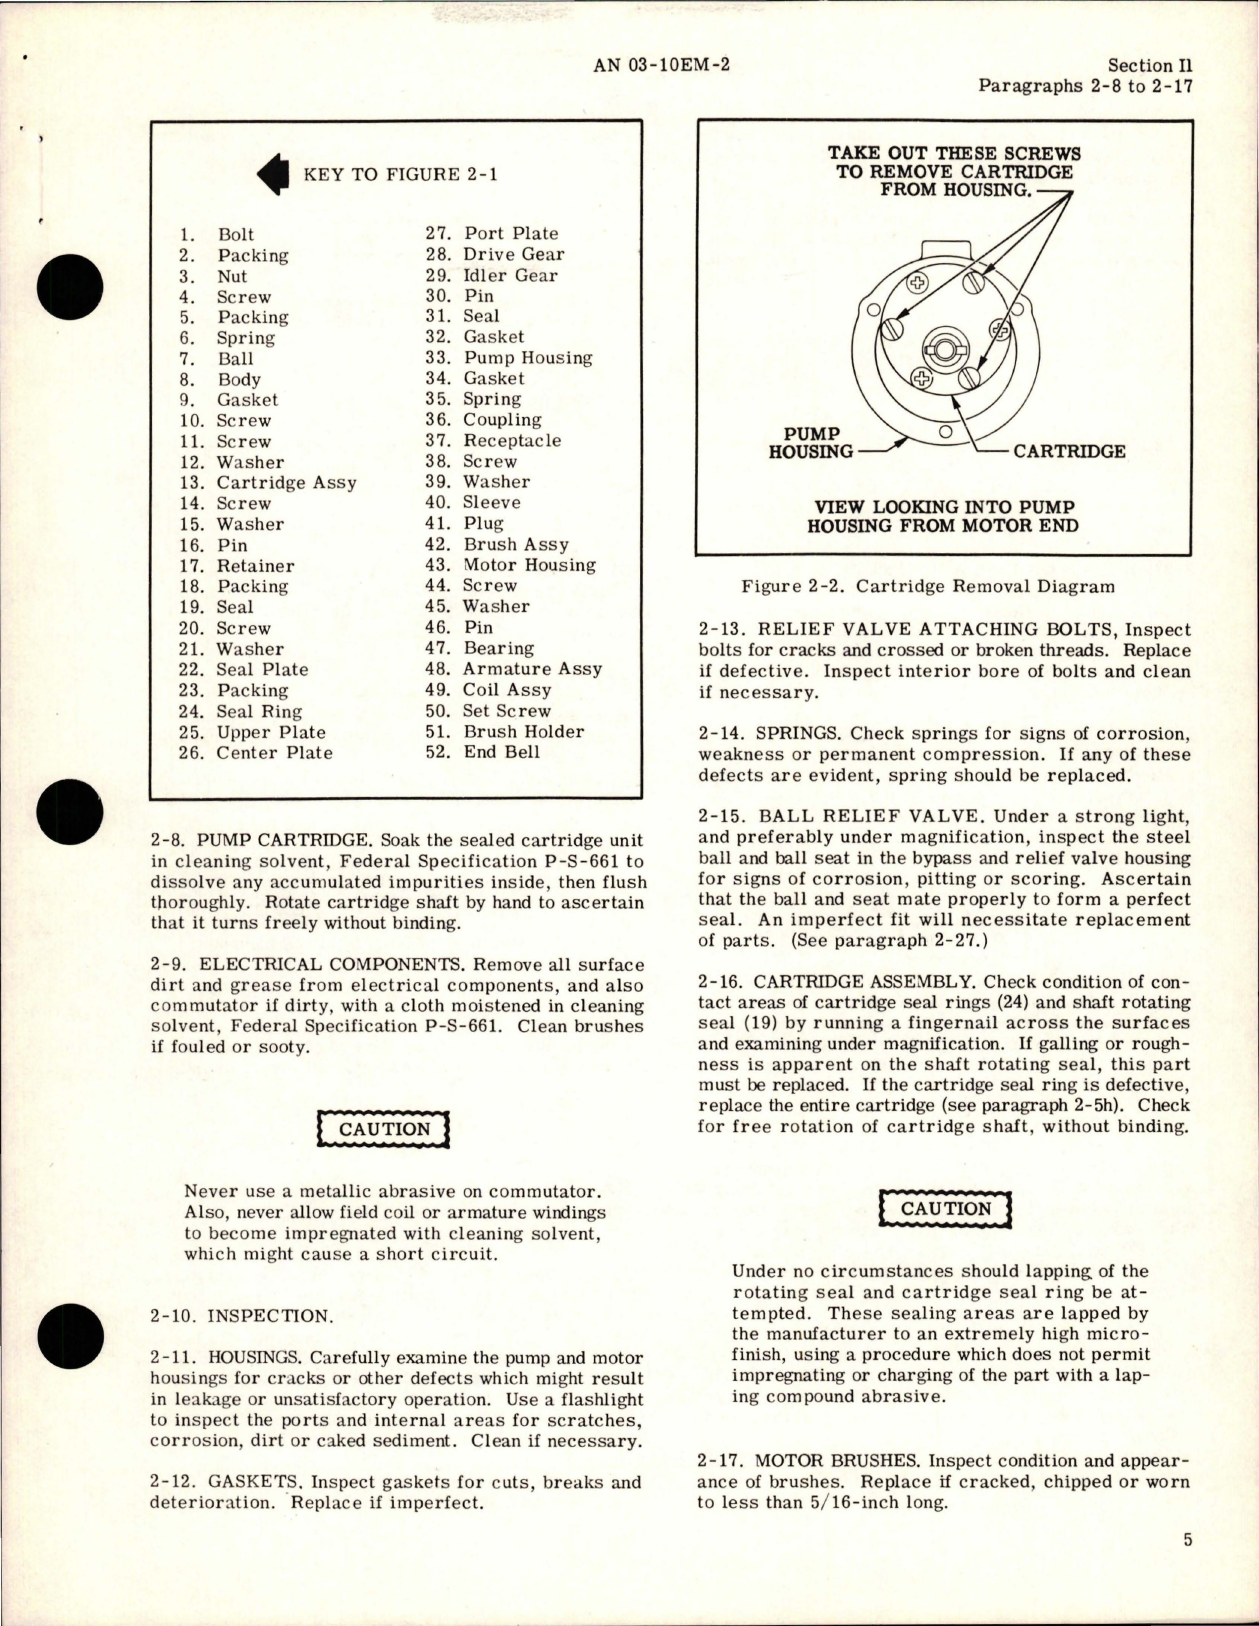 Sample page 7 from AirCorps Library document: Overhaul Instructions for Emergency Fuel Pump - Parts 19902 and 20653-2